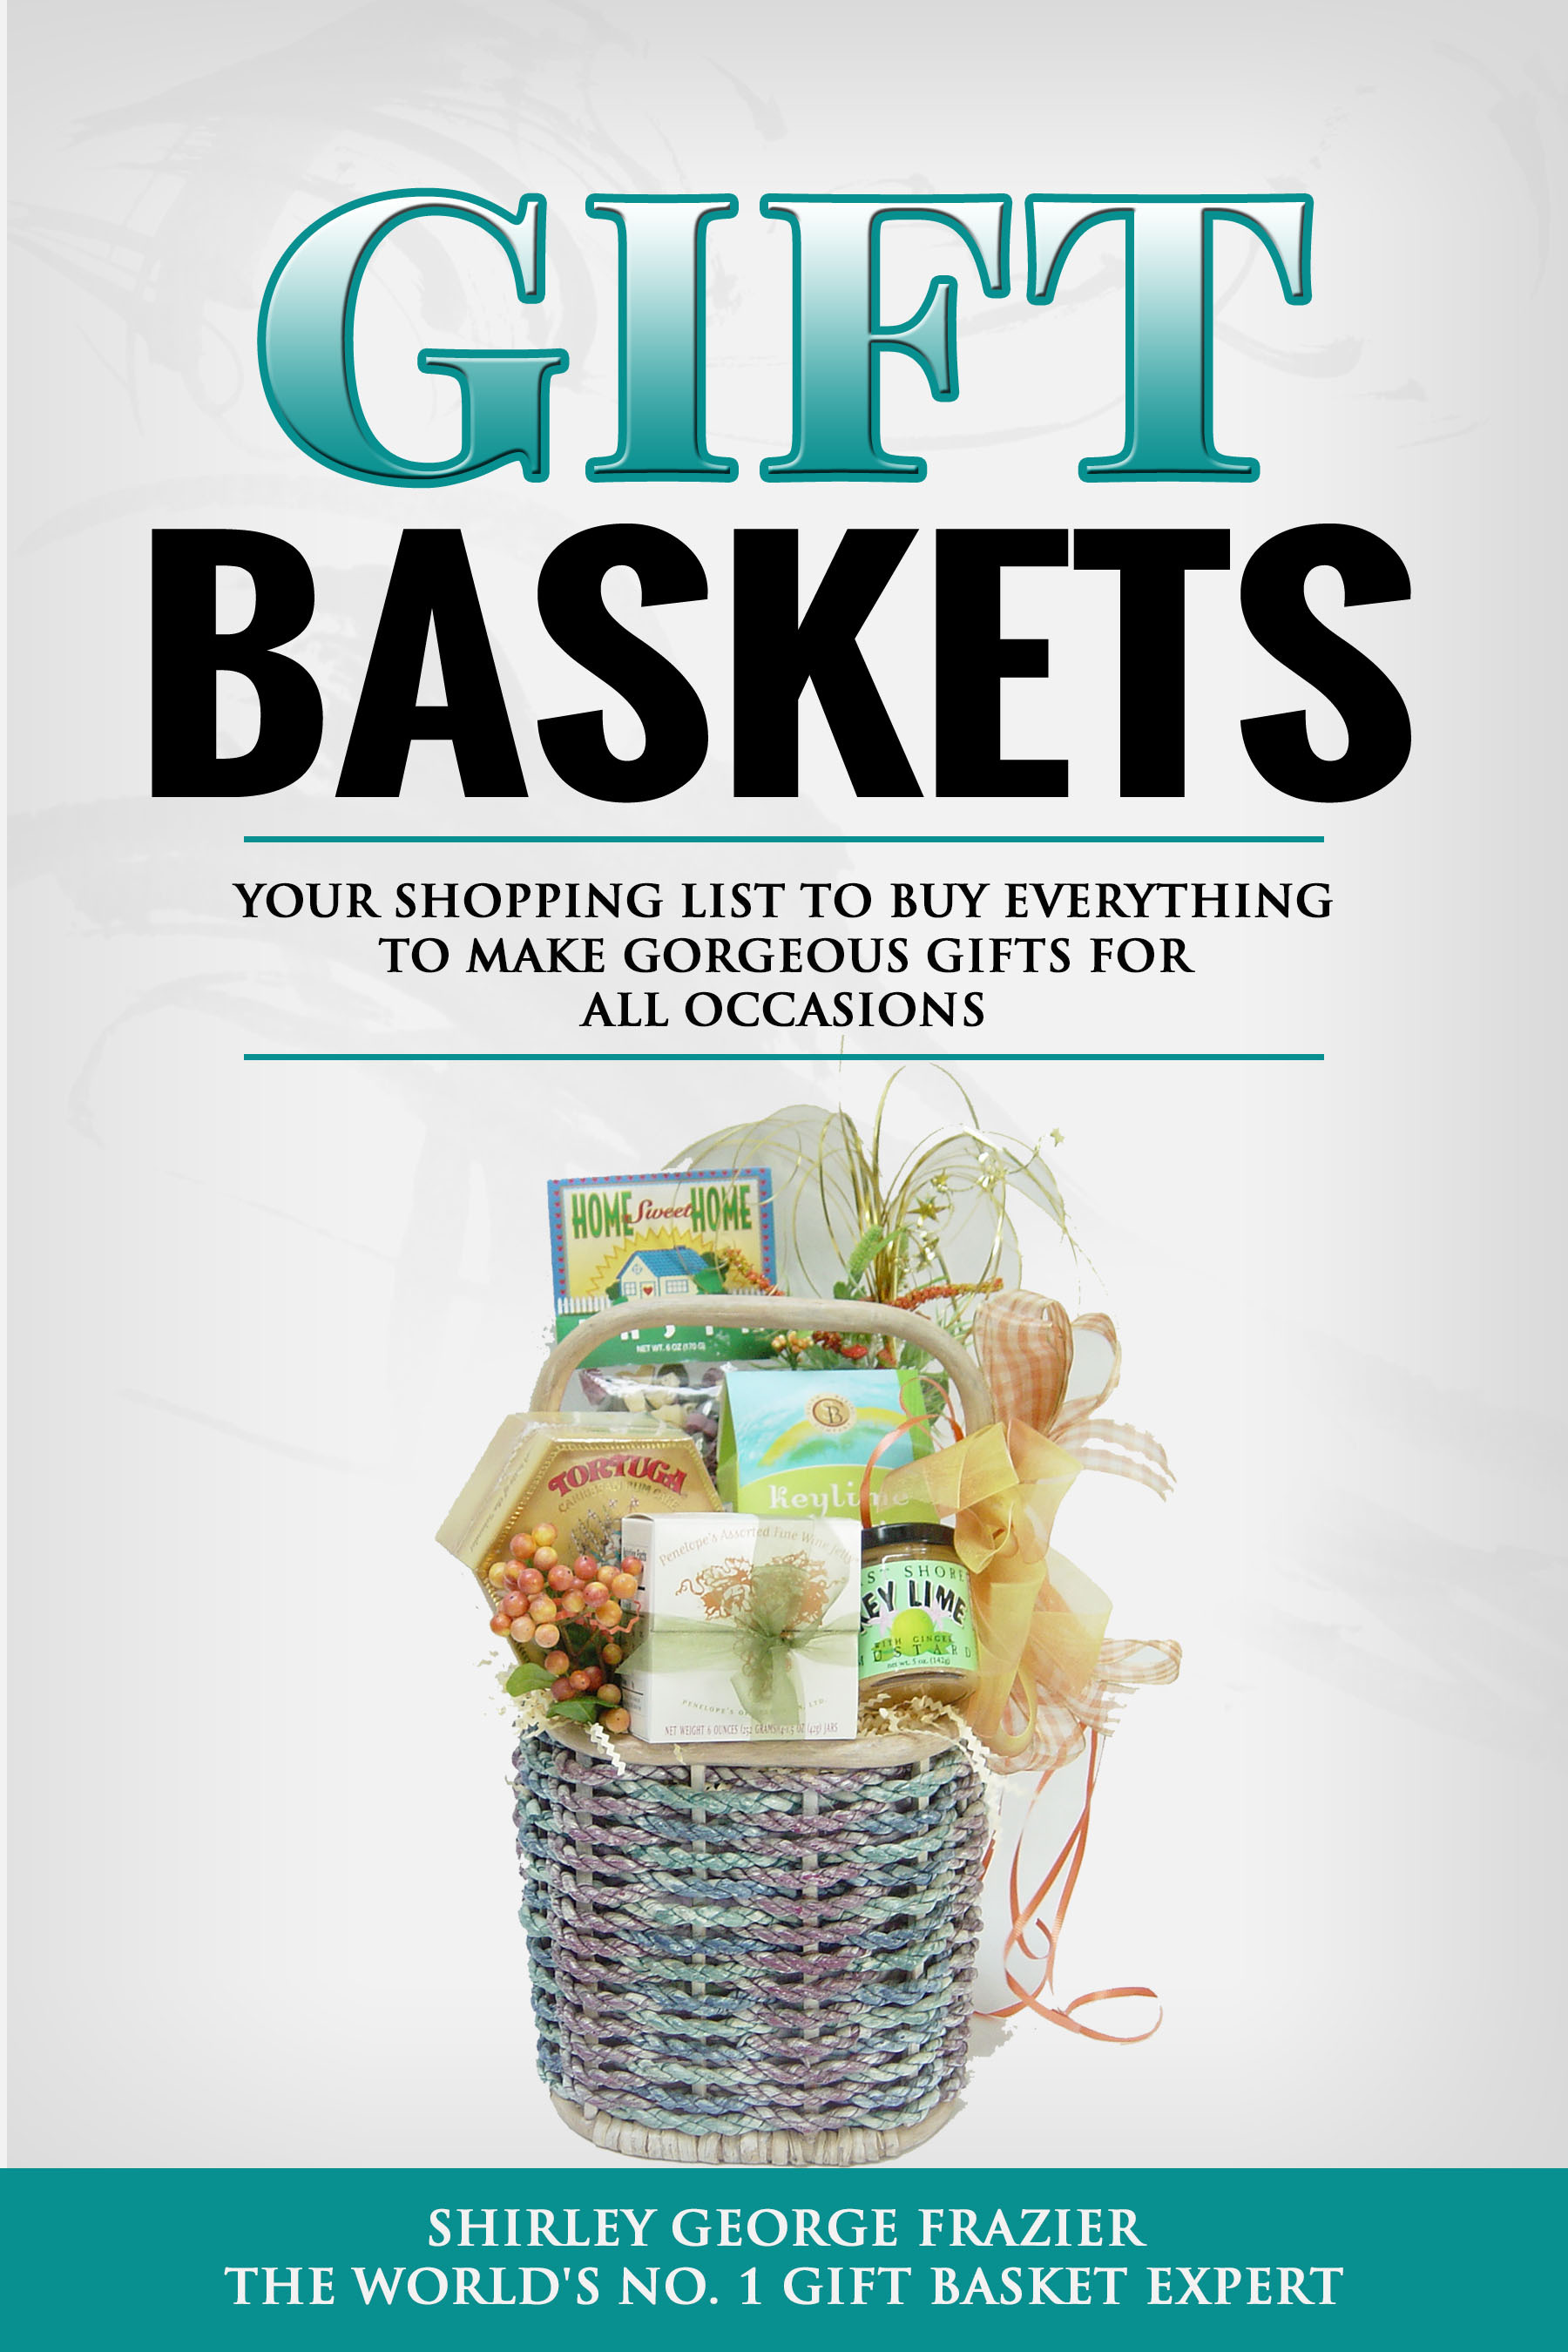 1555 Gift Basket Business Names Ideas And Domains Generator  Guide   BrandBoy